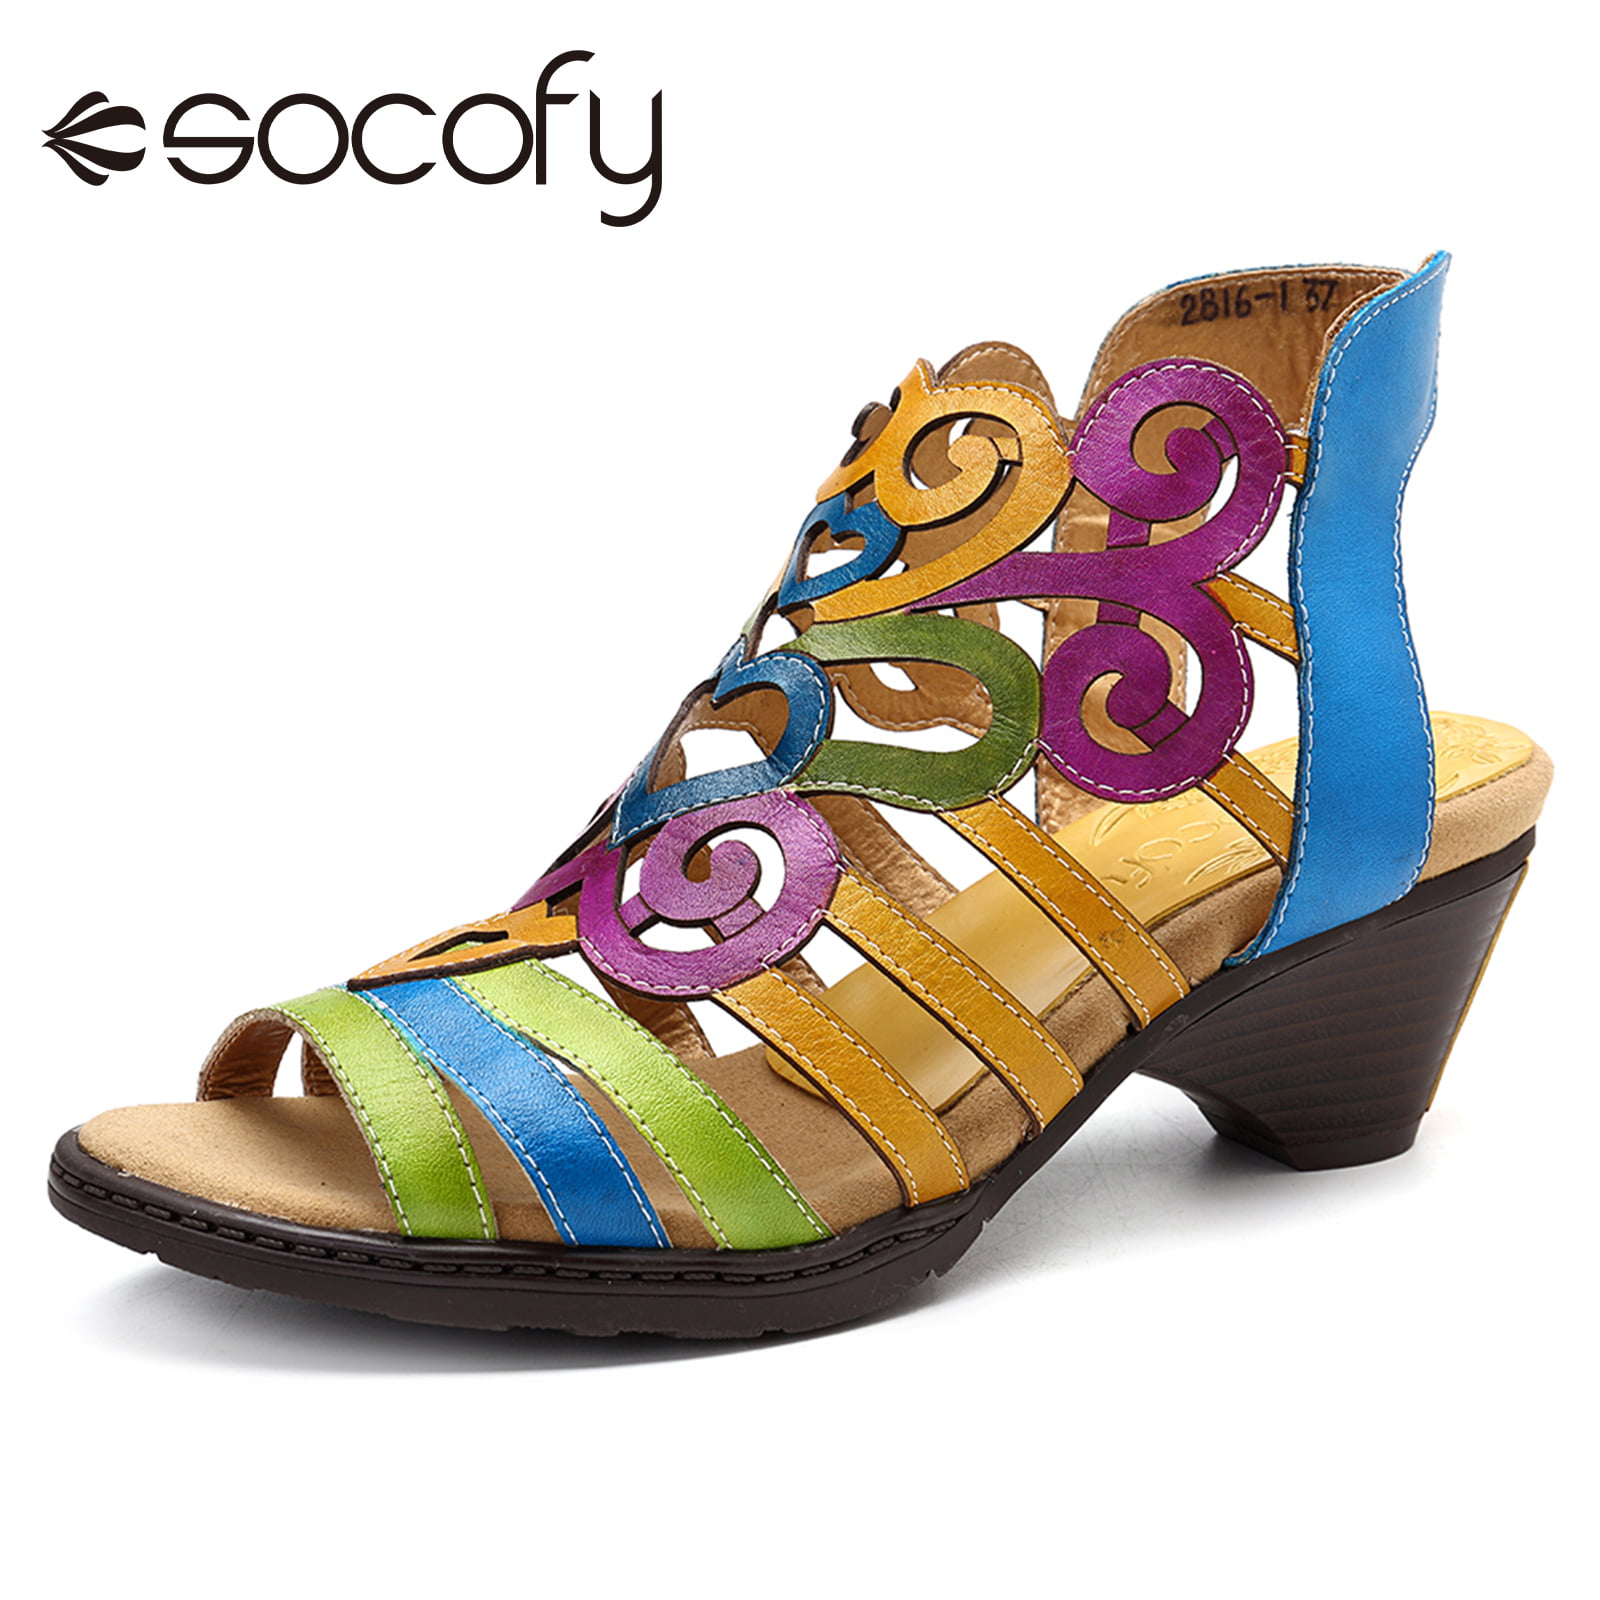 SOCOFY Retro Colorful Super Comfy Hollow Out Genuine Leather Heart Shape  Soft Hook Loop Low Heel Gladiator Sandals 